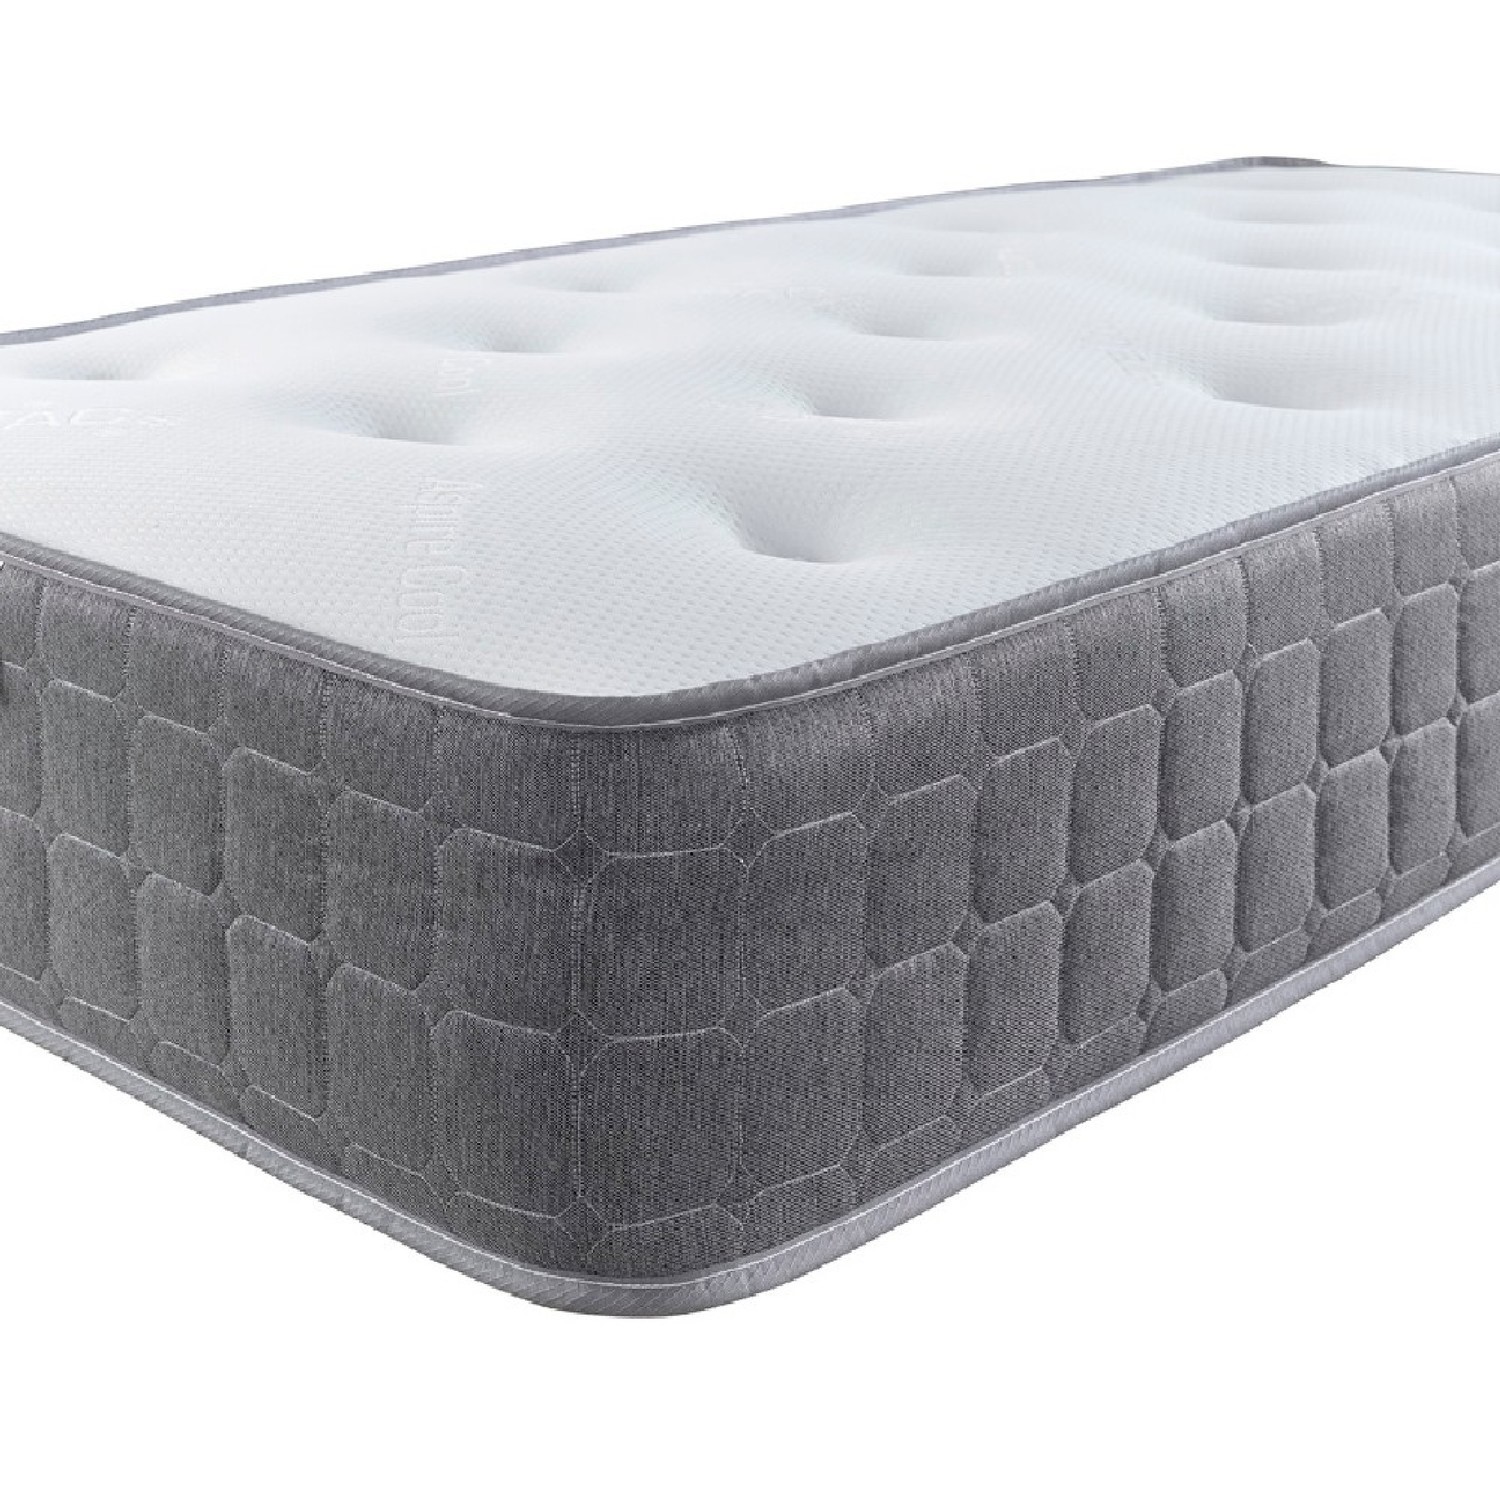 Aspire firm cooling natural fibre coil spring mattress - small double